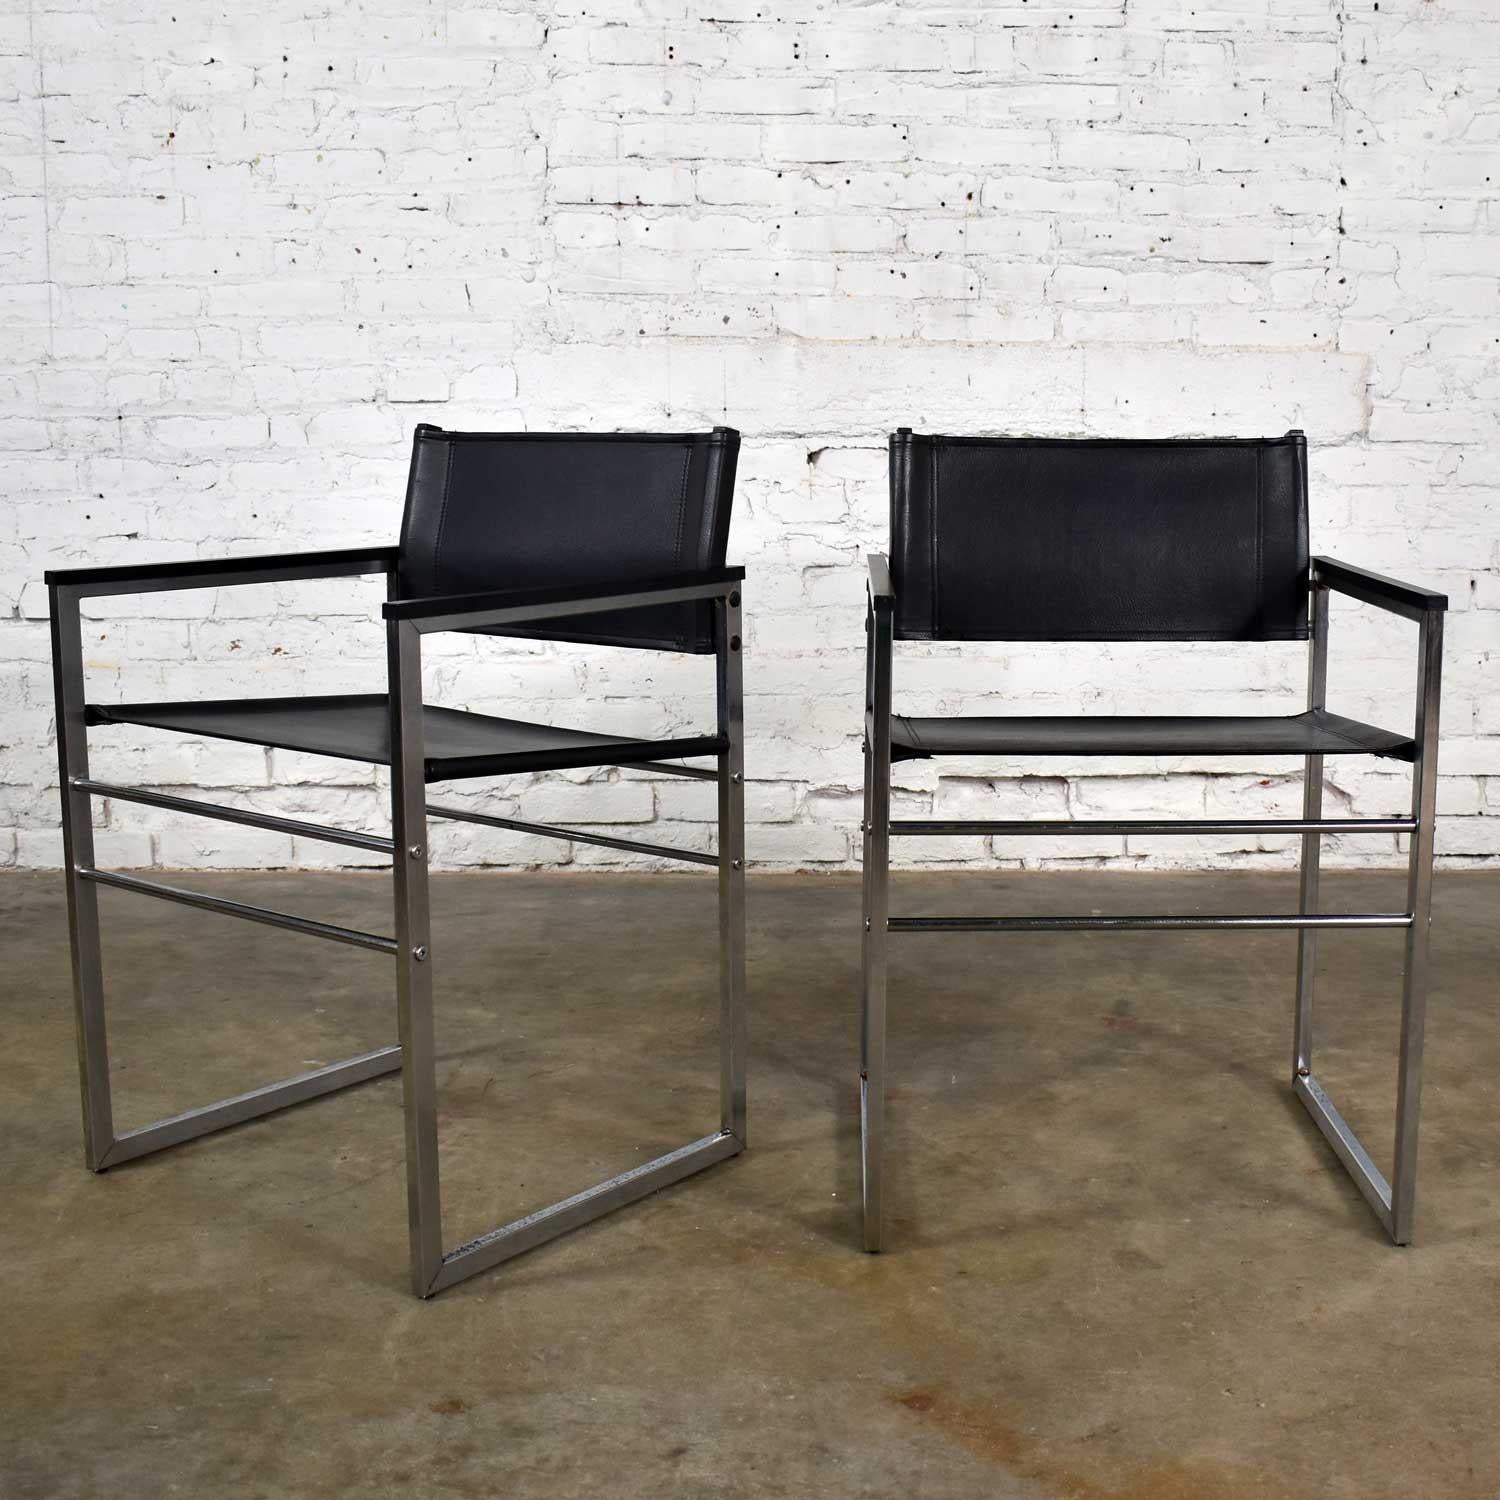 Handsome pair of chrome and black vinyl faux leather Campaign style sling director’s chairs with straight legs. They are in wonderful vintage condition. They wear their original black faux leather slings which look great. The chrome has been cleaned